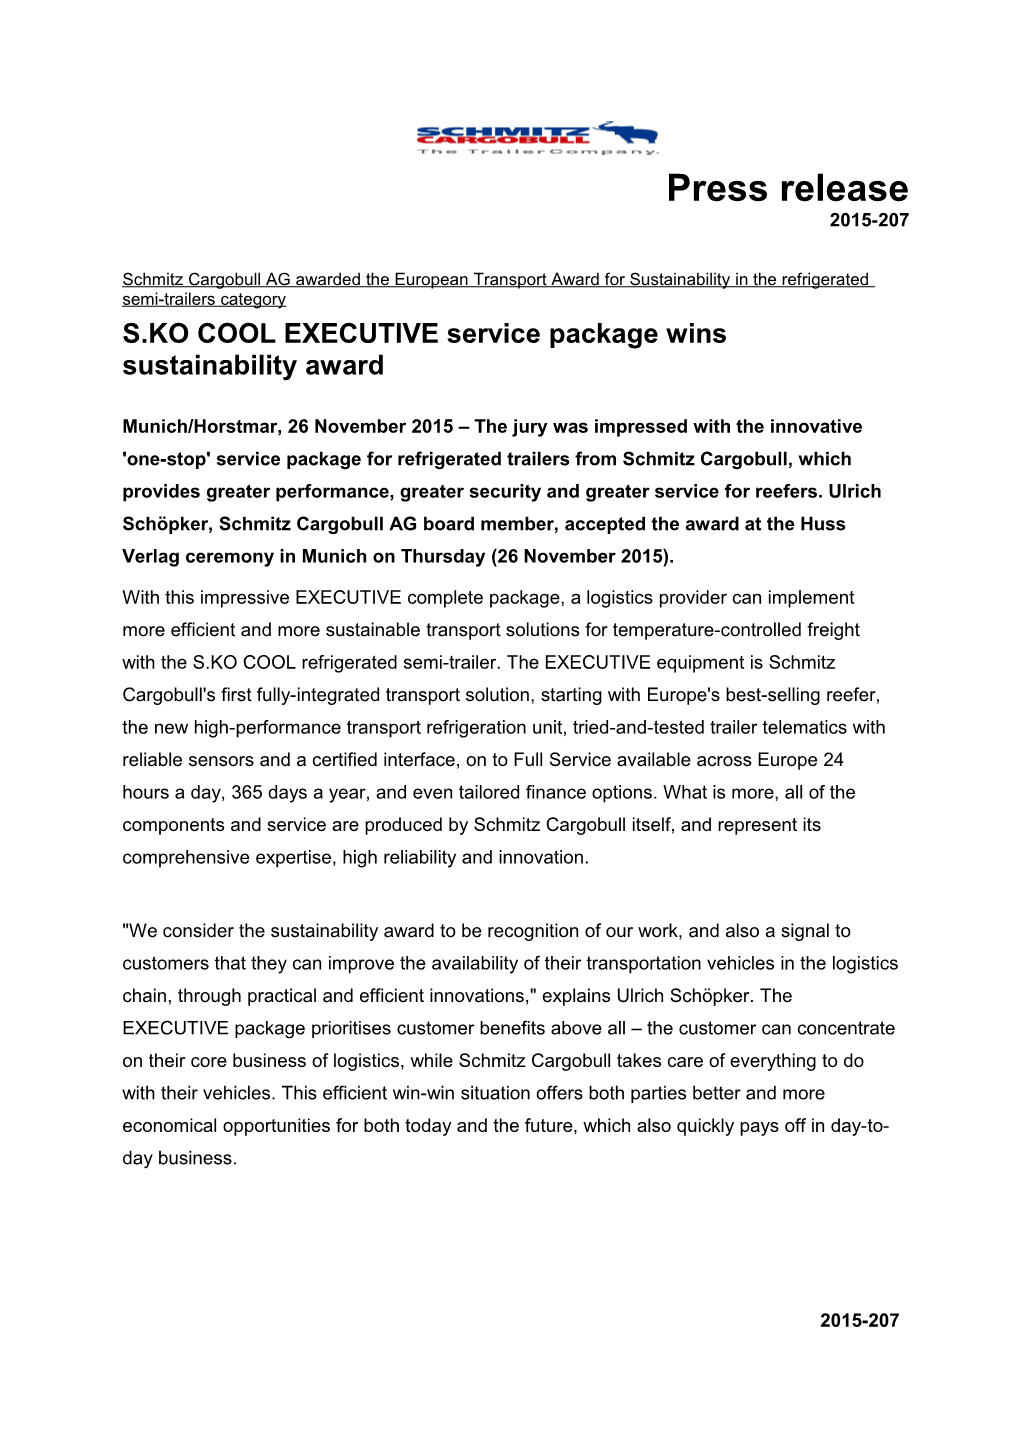 S.KO COOL EXECUTIVE Service Package Wins Sustainability Award